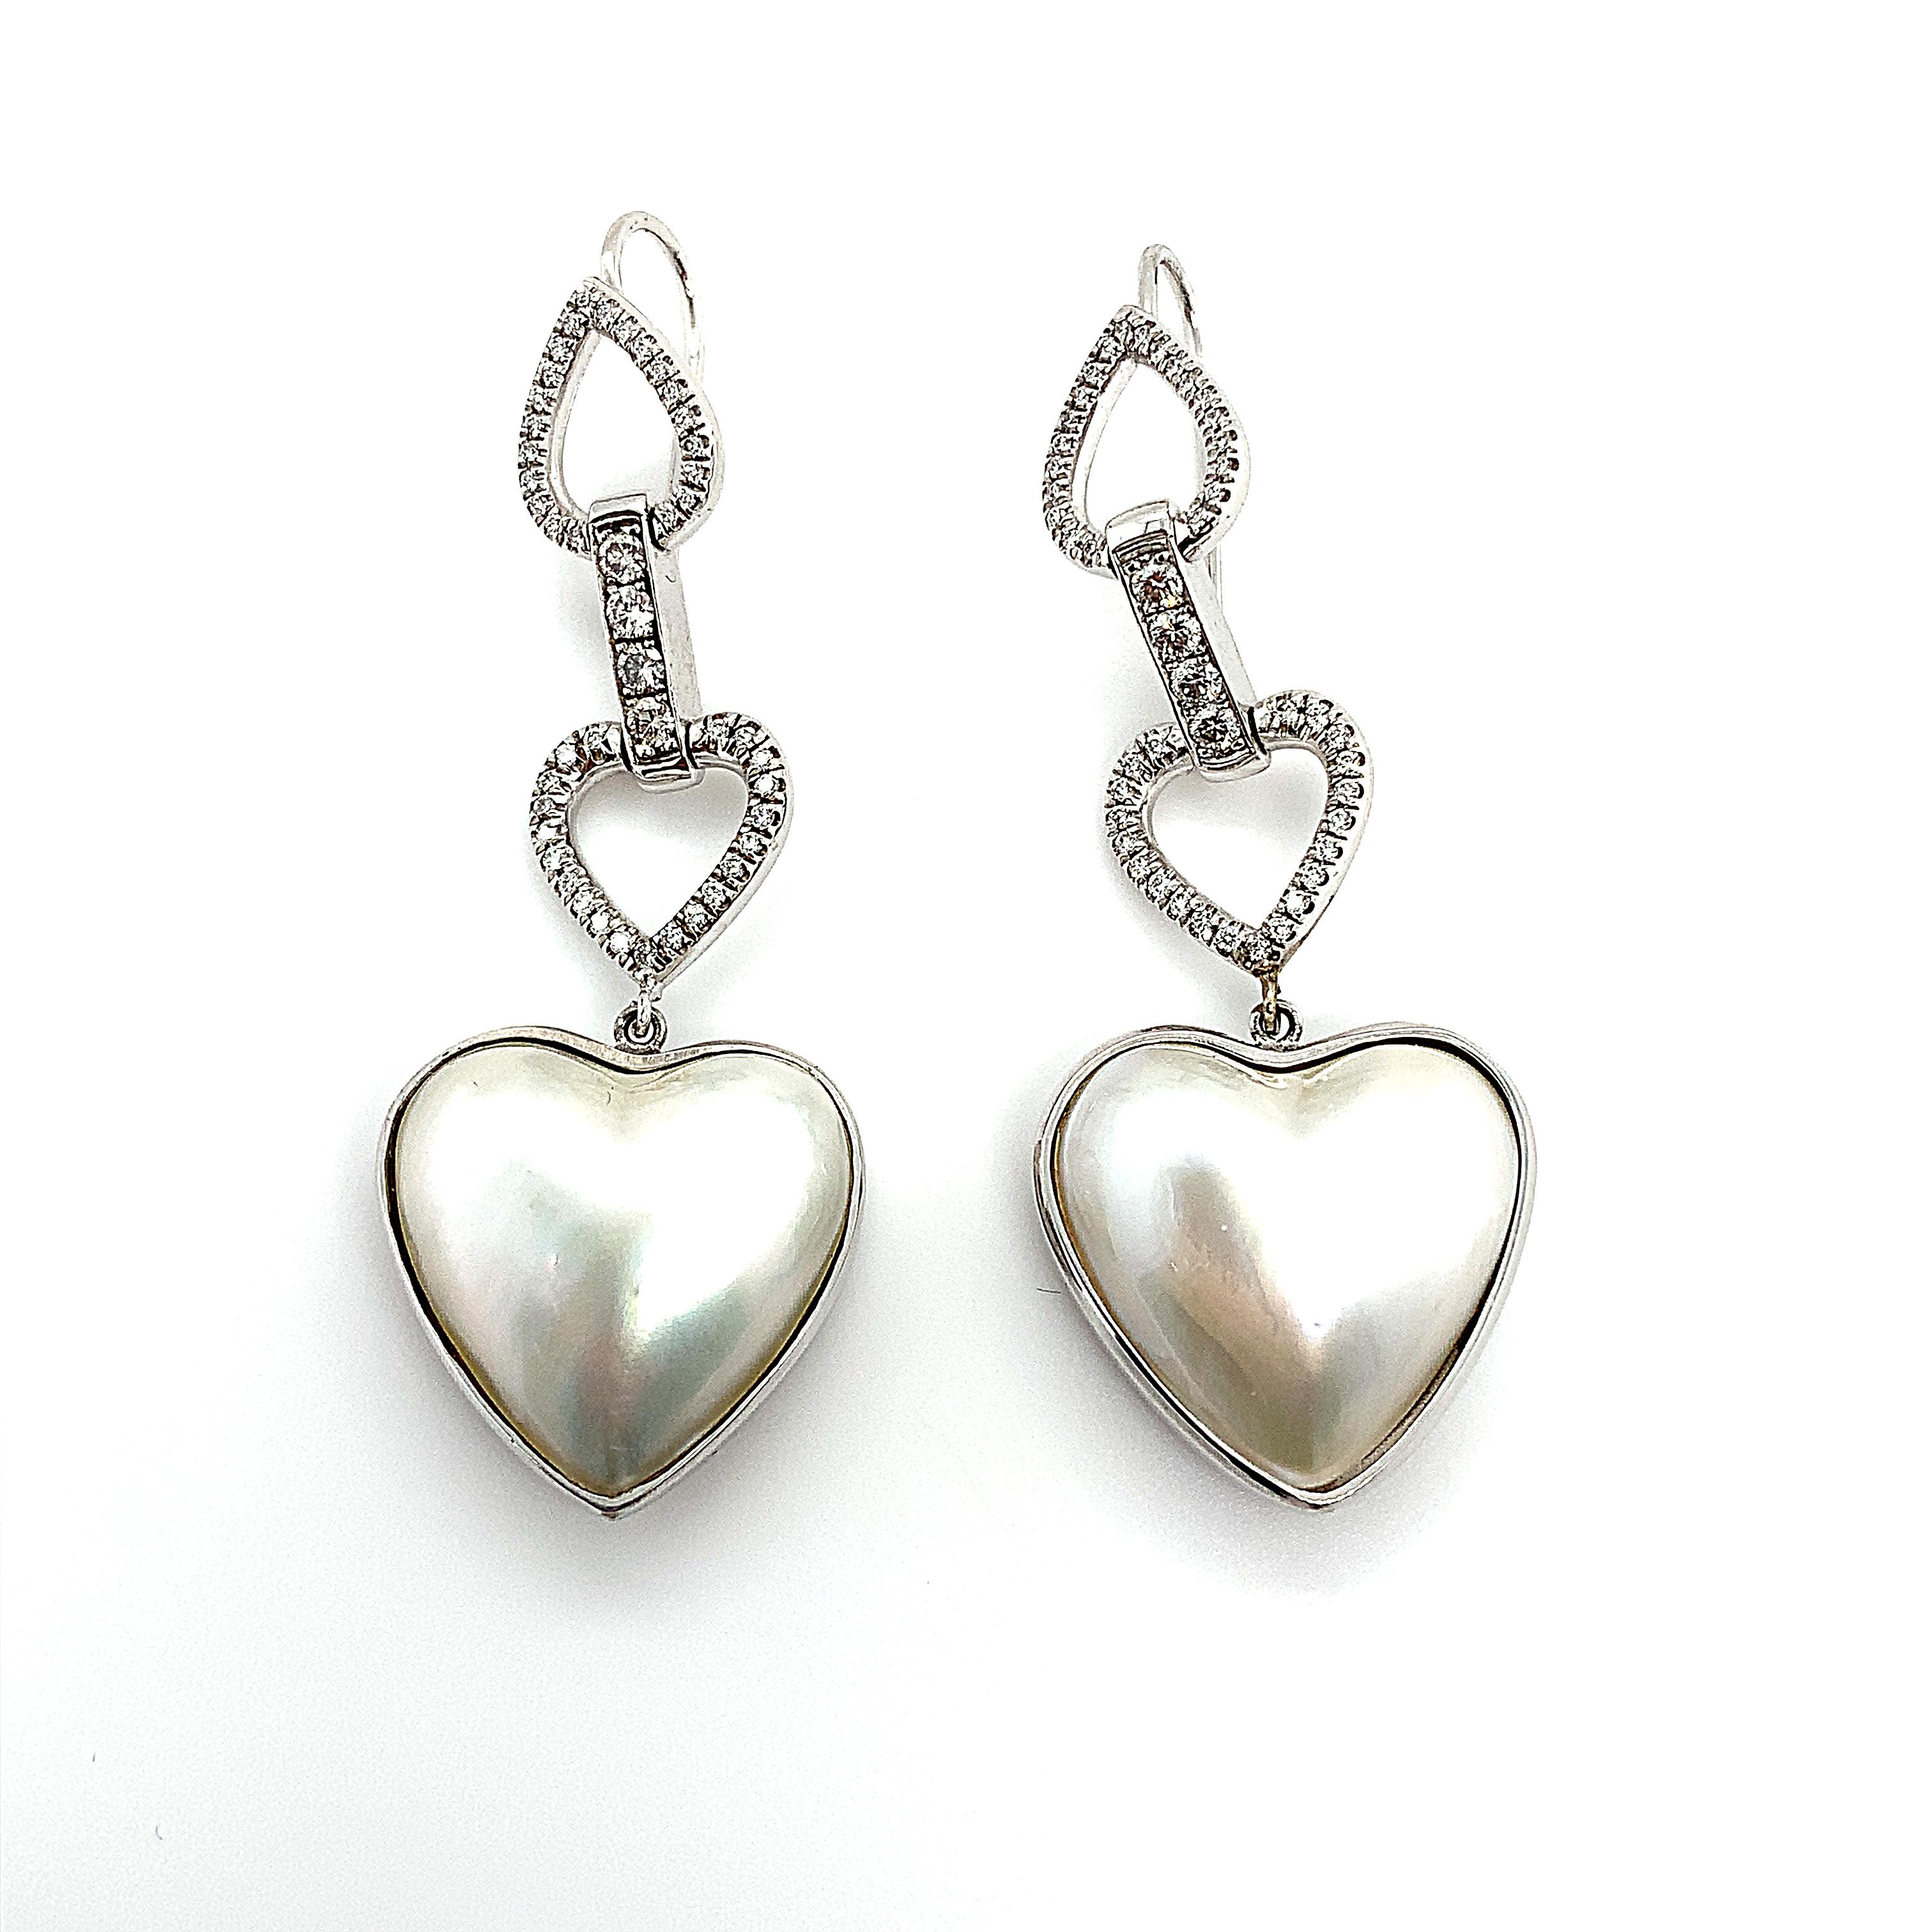 Absolutely stunning cultured pearl heart shaped cream shade matching excellent cut gemstones drop dangle long earrings in 18k white gold.
White cream shade pearl gemstone heart shaped bezel rubover setting in 18k white gold.
Composed of of heart cut